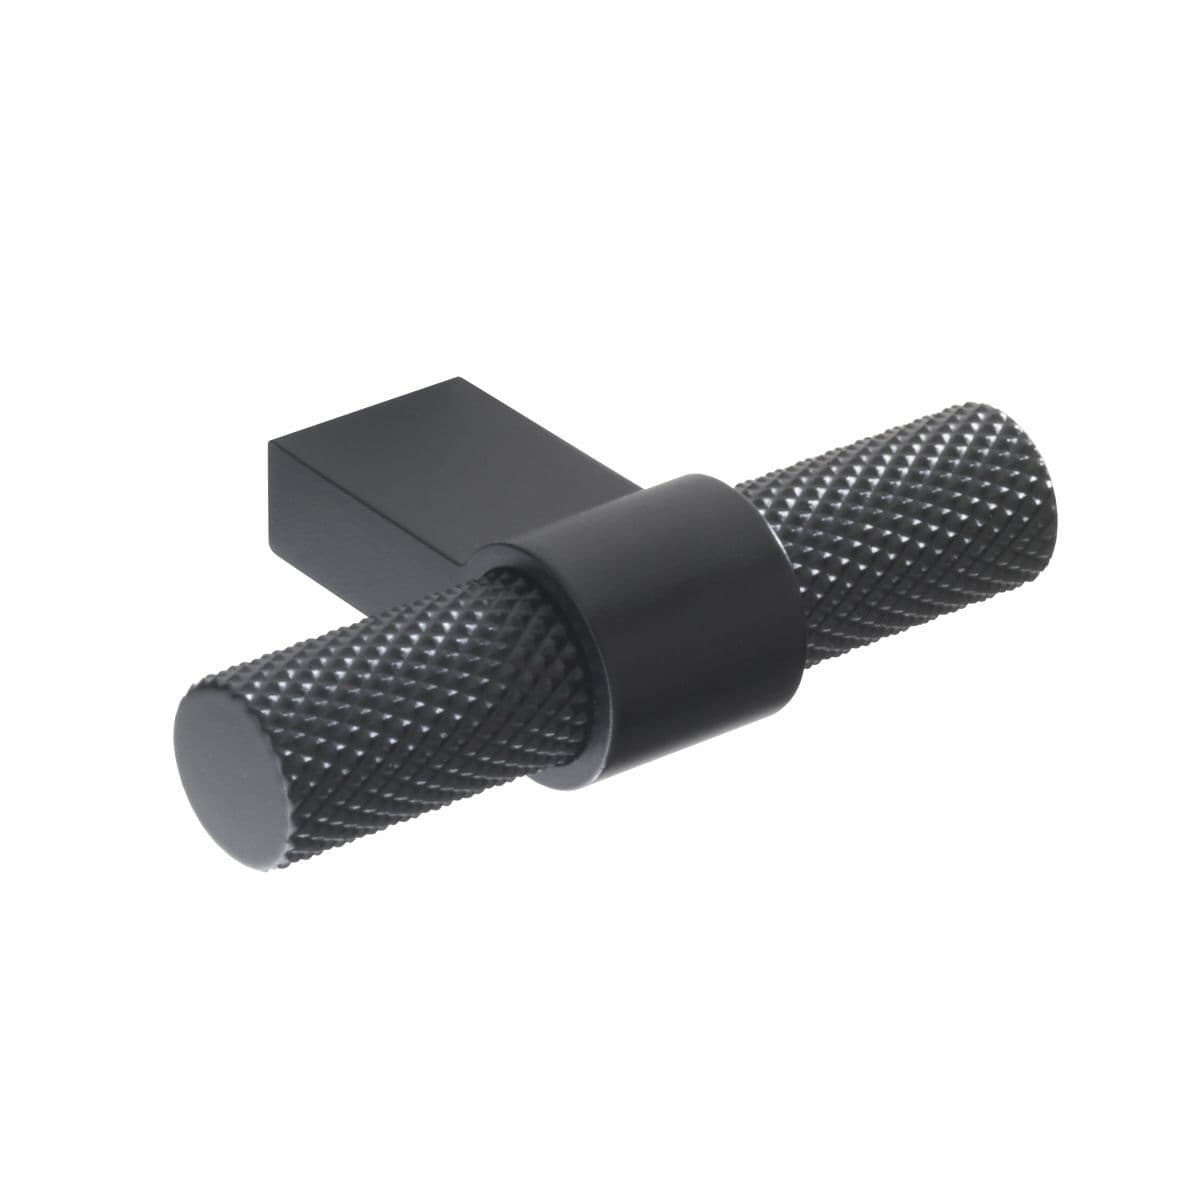 KNURLED T KNOB Cupboard Handle - 60mm long - 3 finishes (PWS H1125.35)